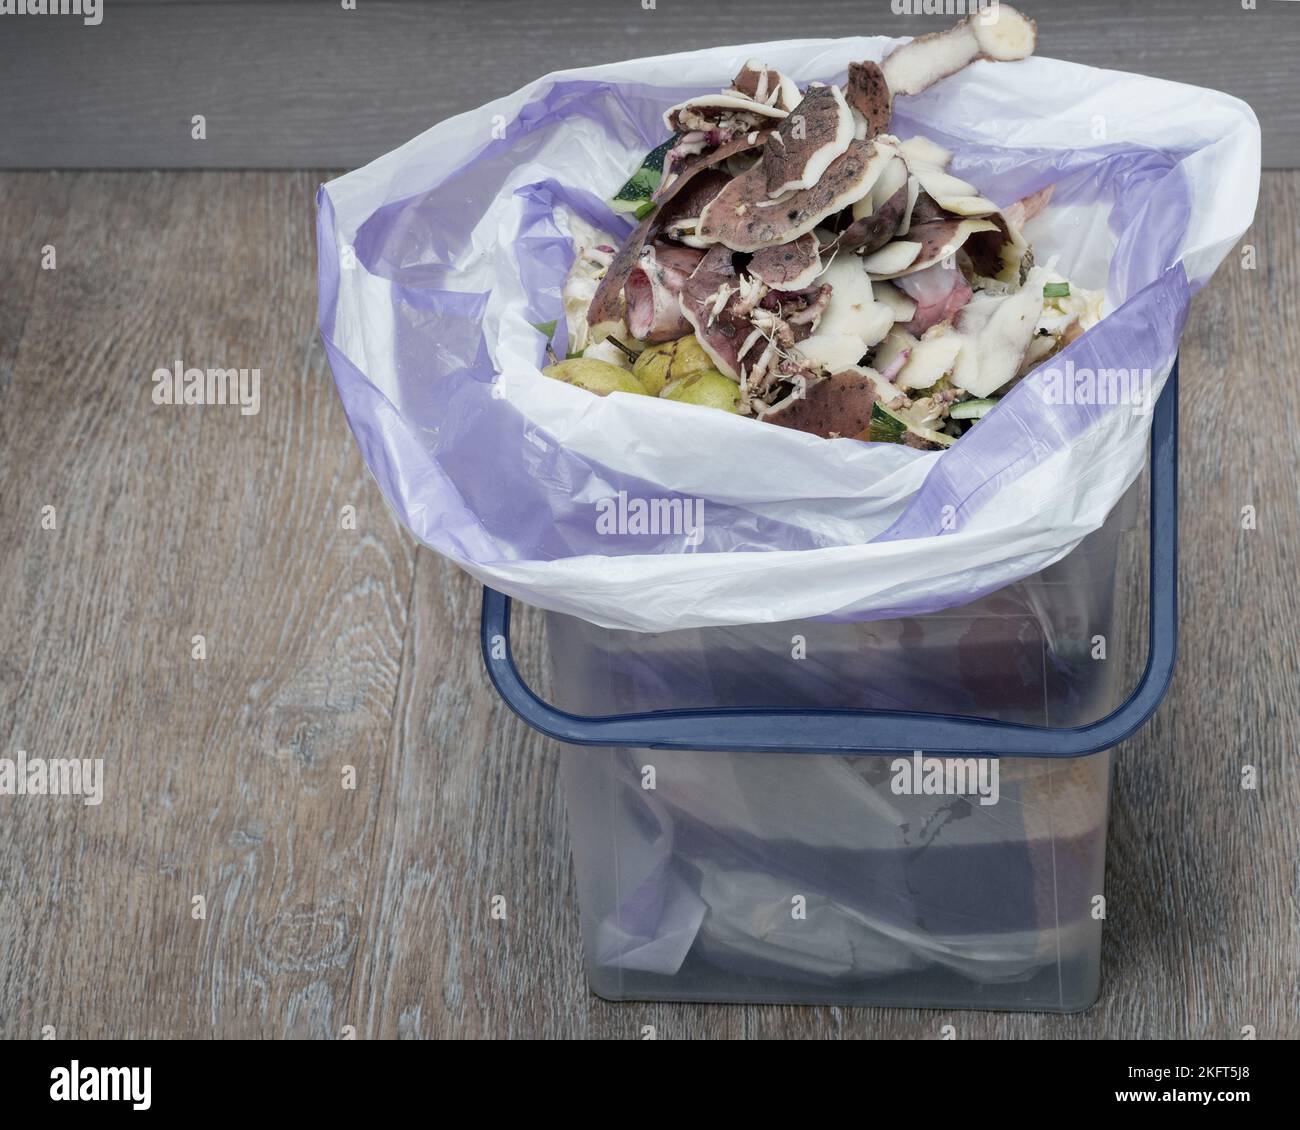 Organic waste in kitchen bucket, Food waste for composting and recycling. Recycling of plastic waste. Separate garbage collection. Caring for the envi Stock Photo